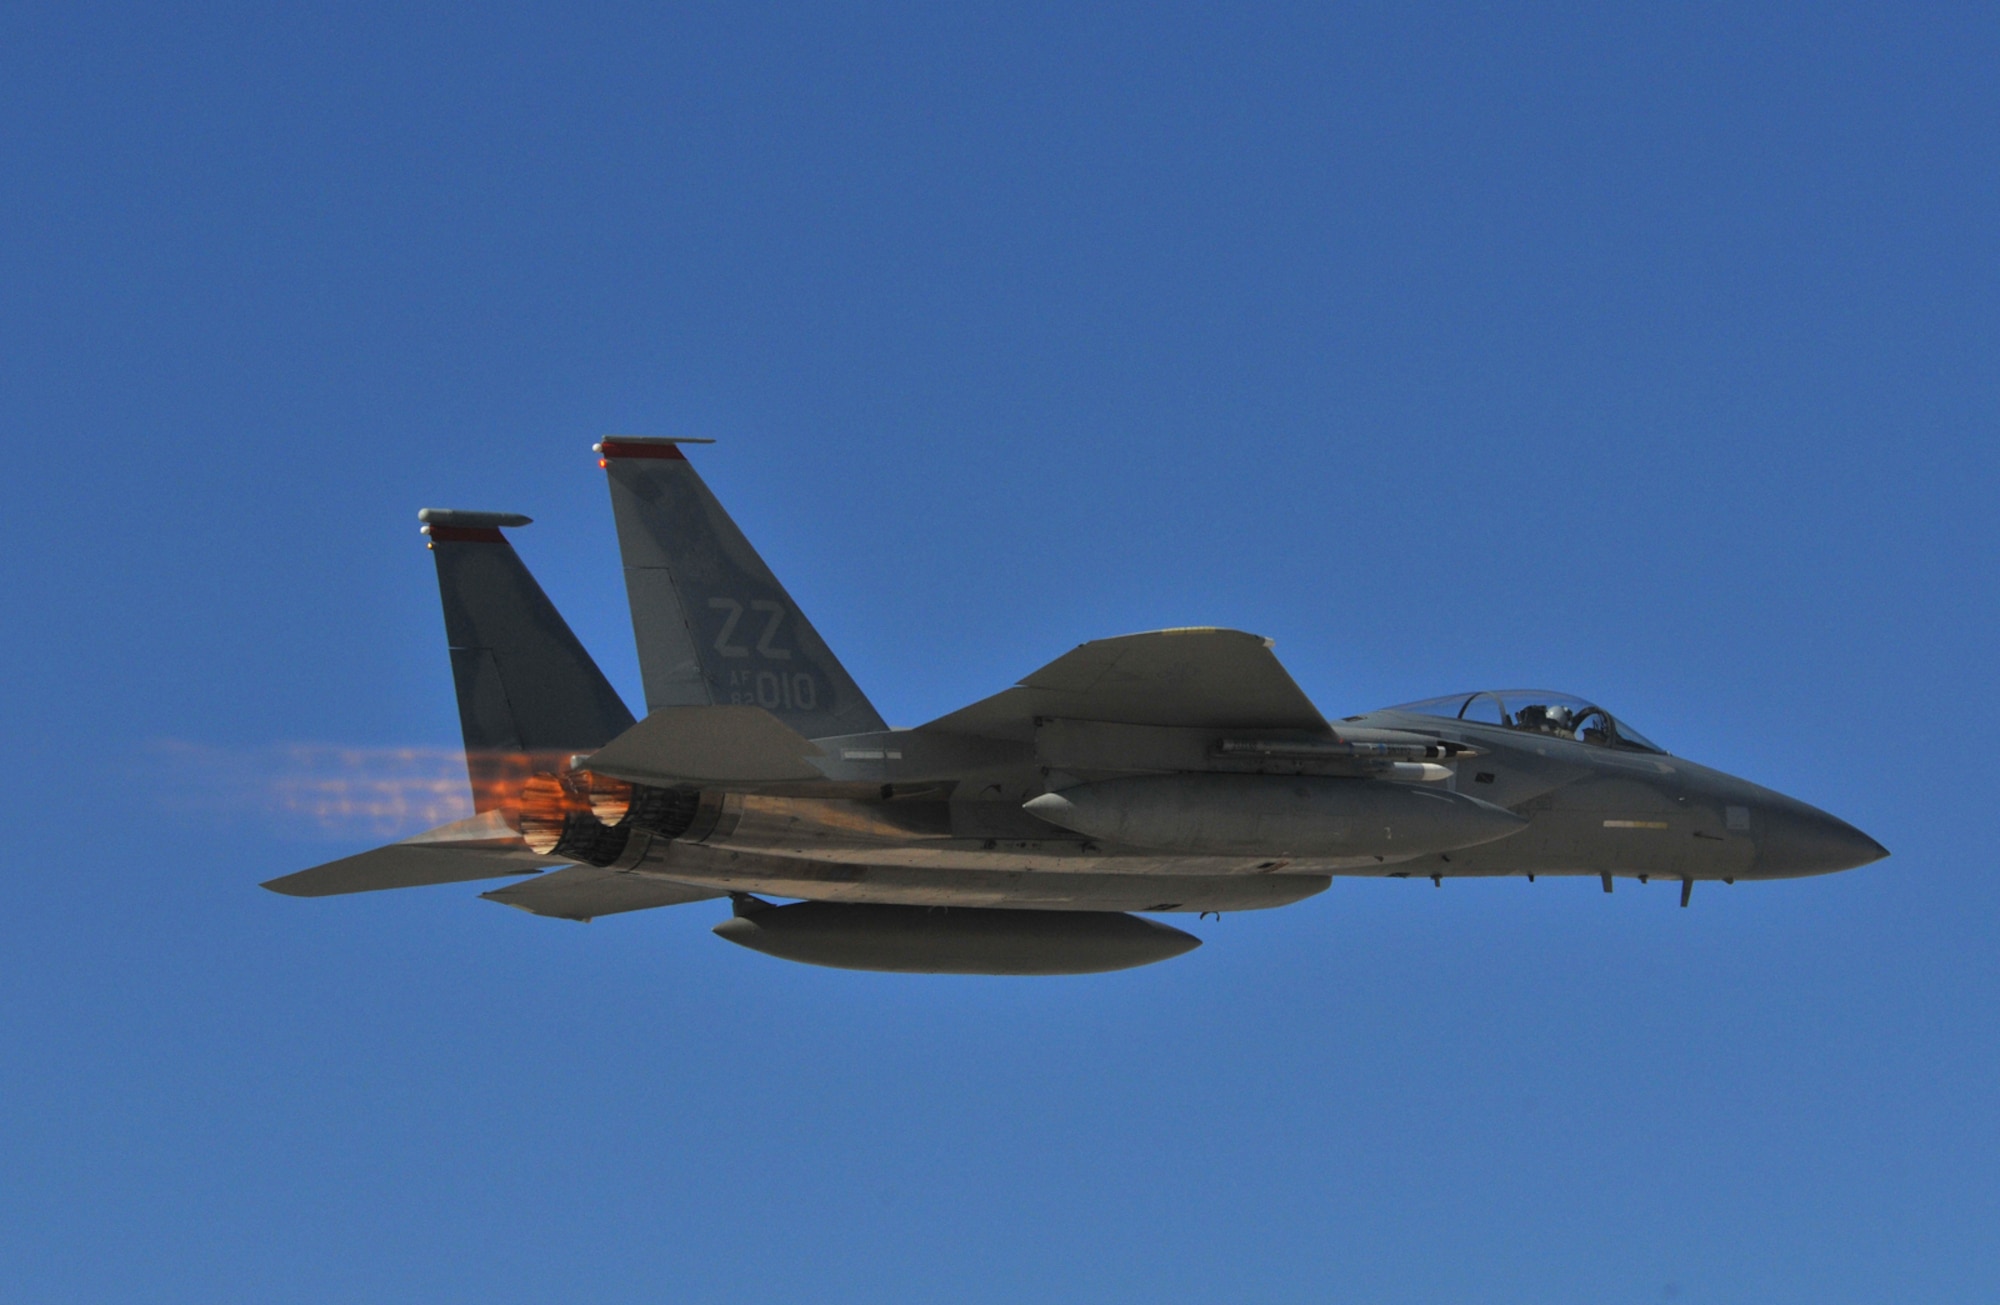 An F-15C Eagle from the 67th Fighter Squadron at Kadena Air Base, Japan, blasts off the runway at Nellis Air Force Base, Nev., on Oct 22.  Airmen and aircraft from the 67th FS are at Nellis for Red Flag 09-1.  Red Flag is a realistic, two-week air campaign fought over the vast Nevada Test and Training Range.  The exercise brings together airmen from the Air Force, sister services and allies in the world's largest joint air combat exercise.  (Air Force photo by Chief Master Sgt. Gary Emery)